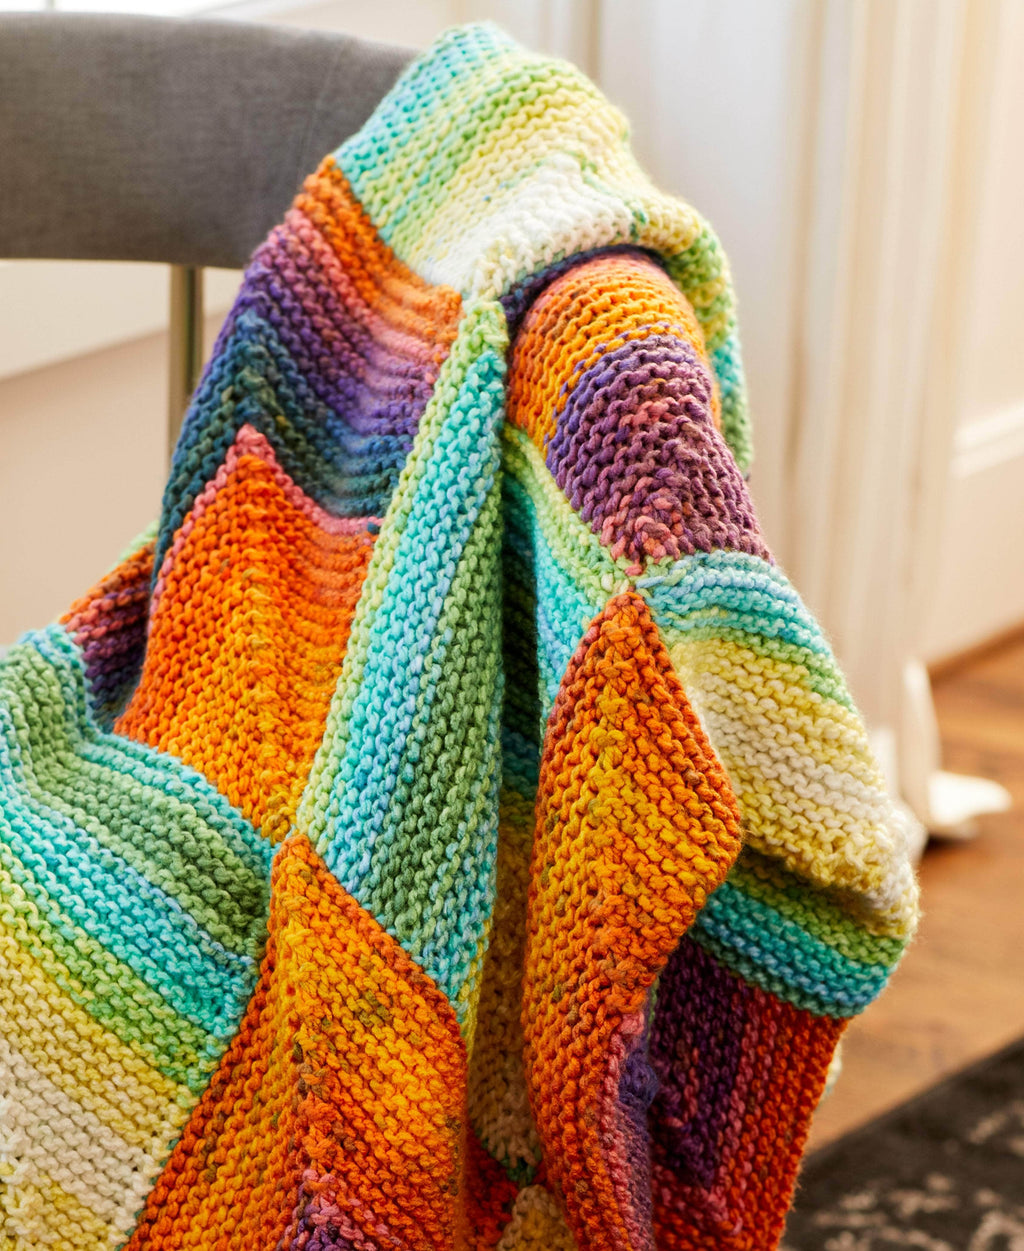 Premier Yarns - Looking to learn a new stitch? The Colorful Cluster Throw  uses a Stacked Cluster Stitch that gives the blanket a unique definition.  Yarn: Premier Puzzle 1050-31 Hopscotch  . . #